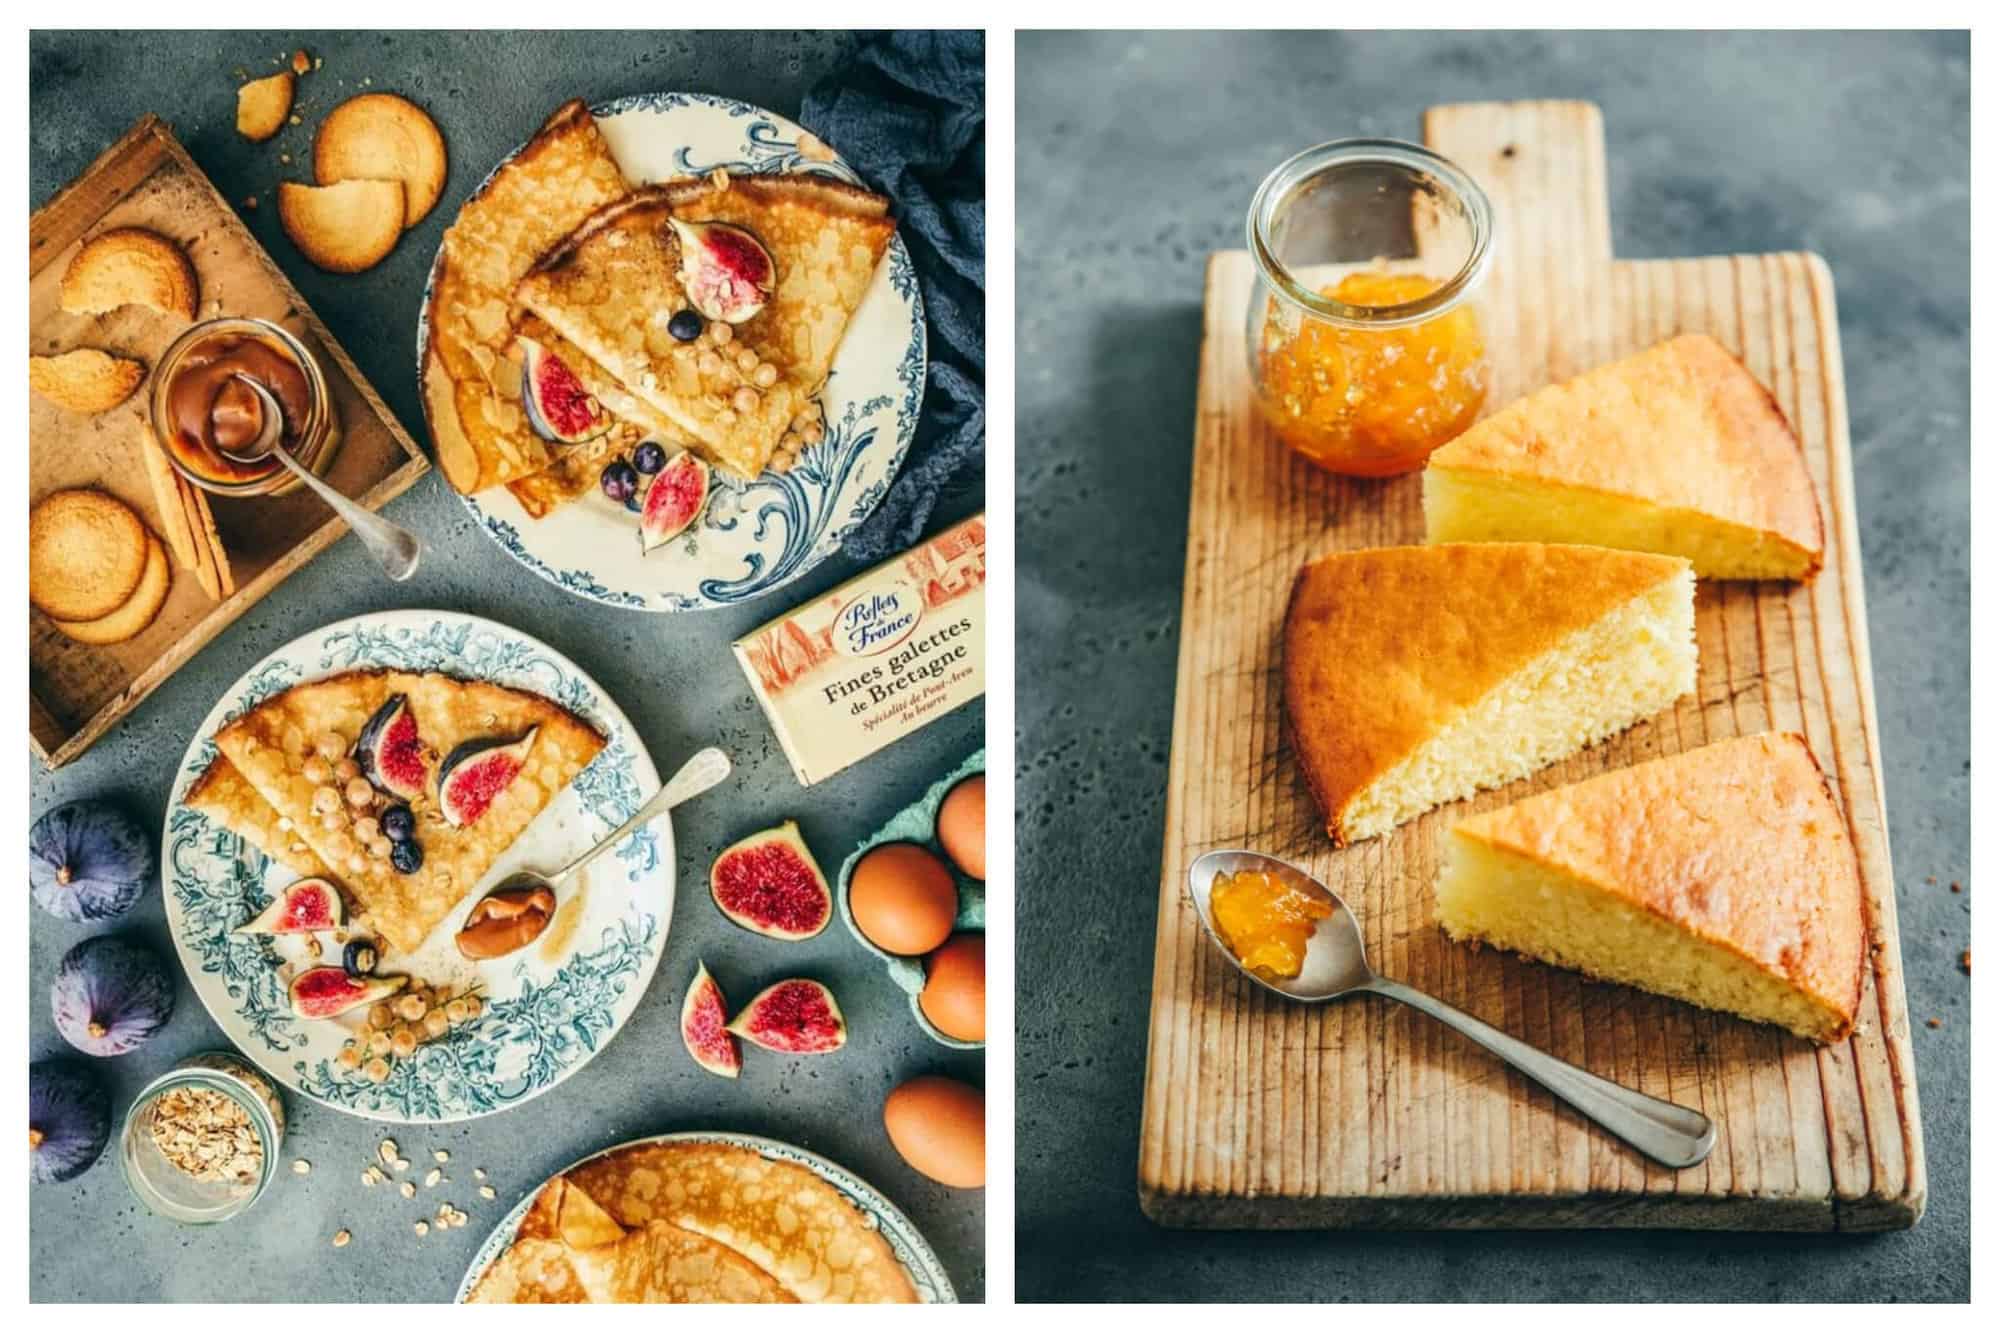 Left: A spread of breakfast food, including plates of crepes with figs on top, various cookies, eggs, butter, and figs, are pictured on top fo a table. Right: Three slices of a yogurt cake are cut and placed on a wooden board. There is a spoon and a container that both hold orange jam. 